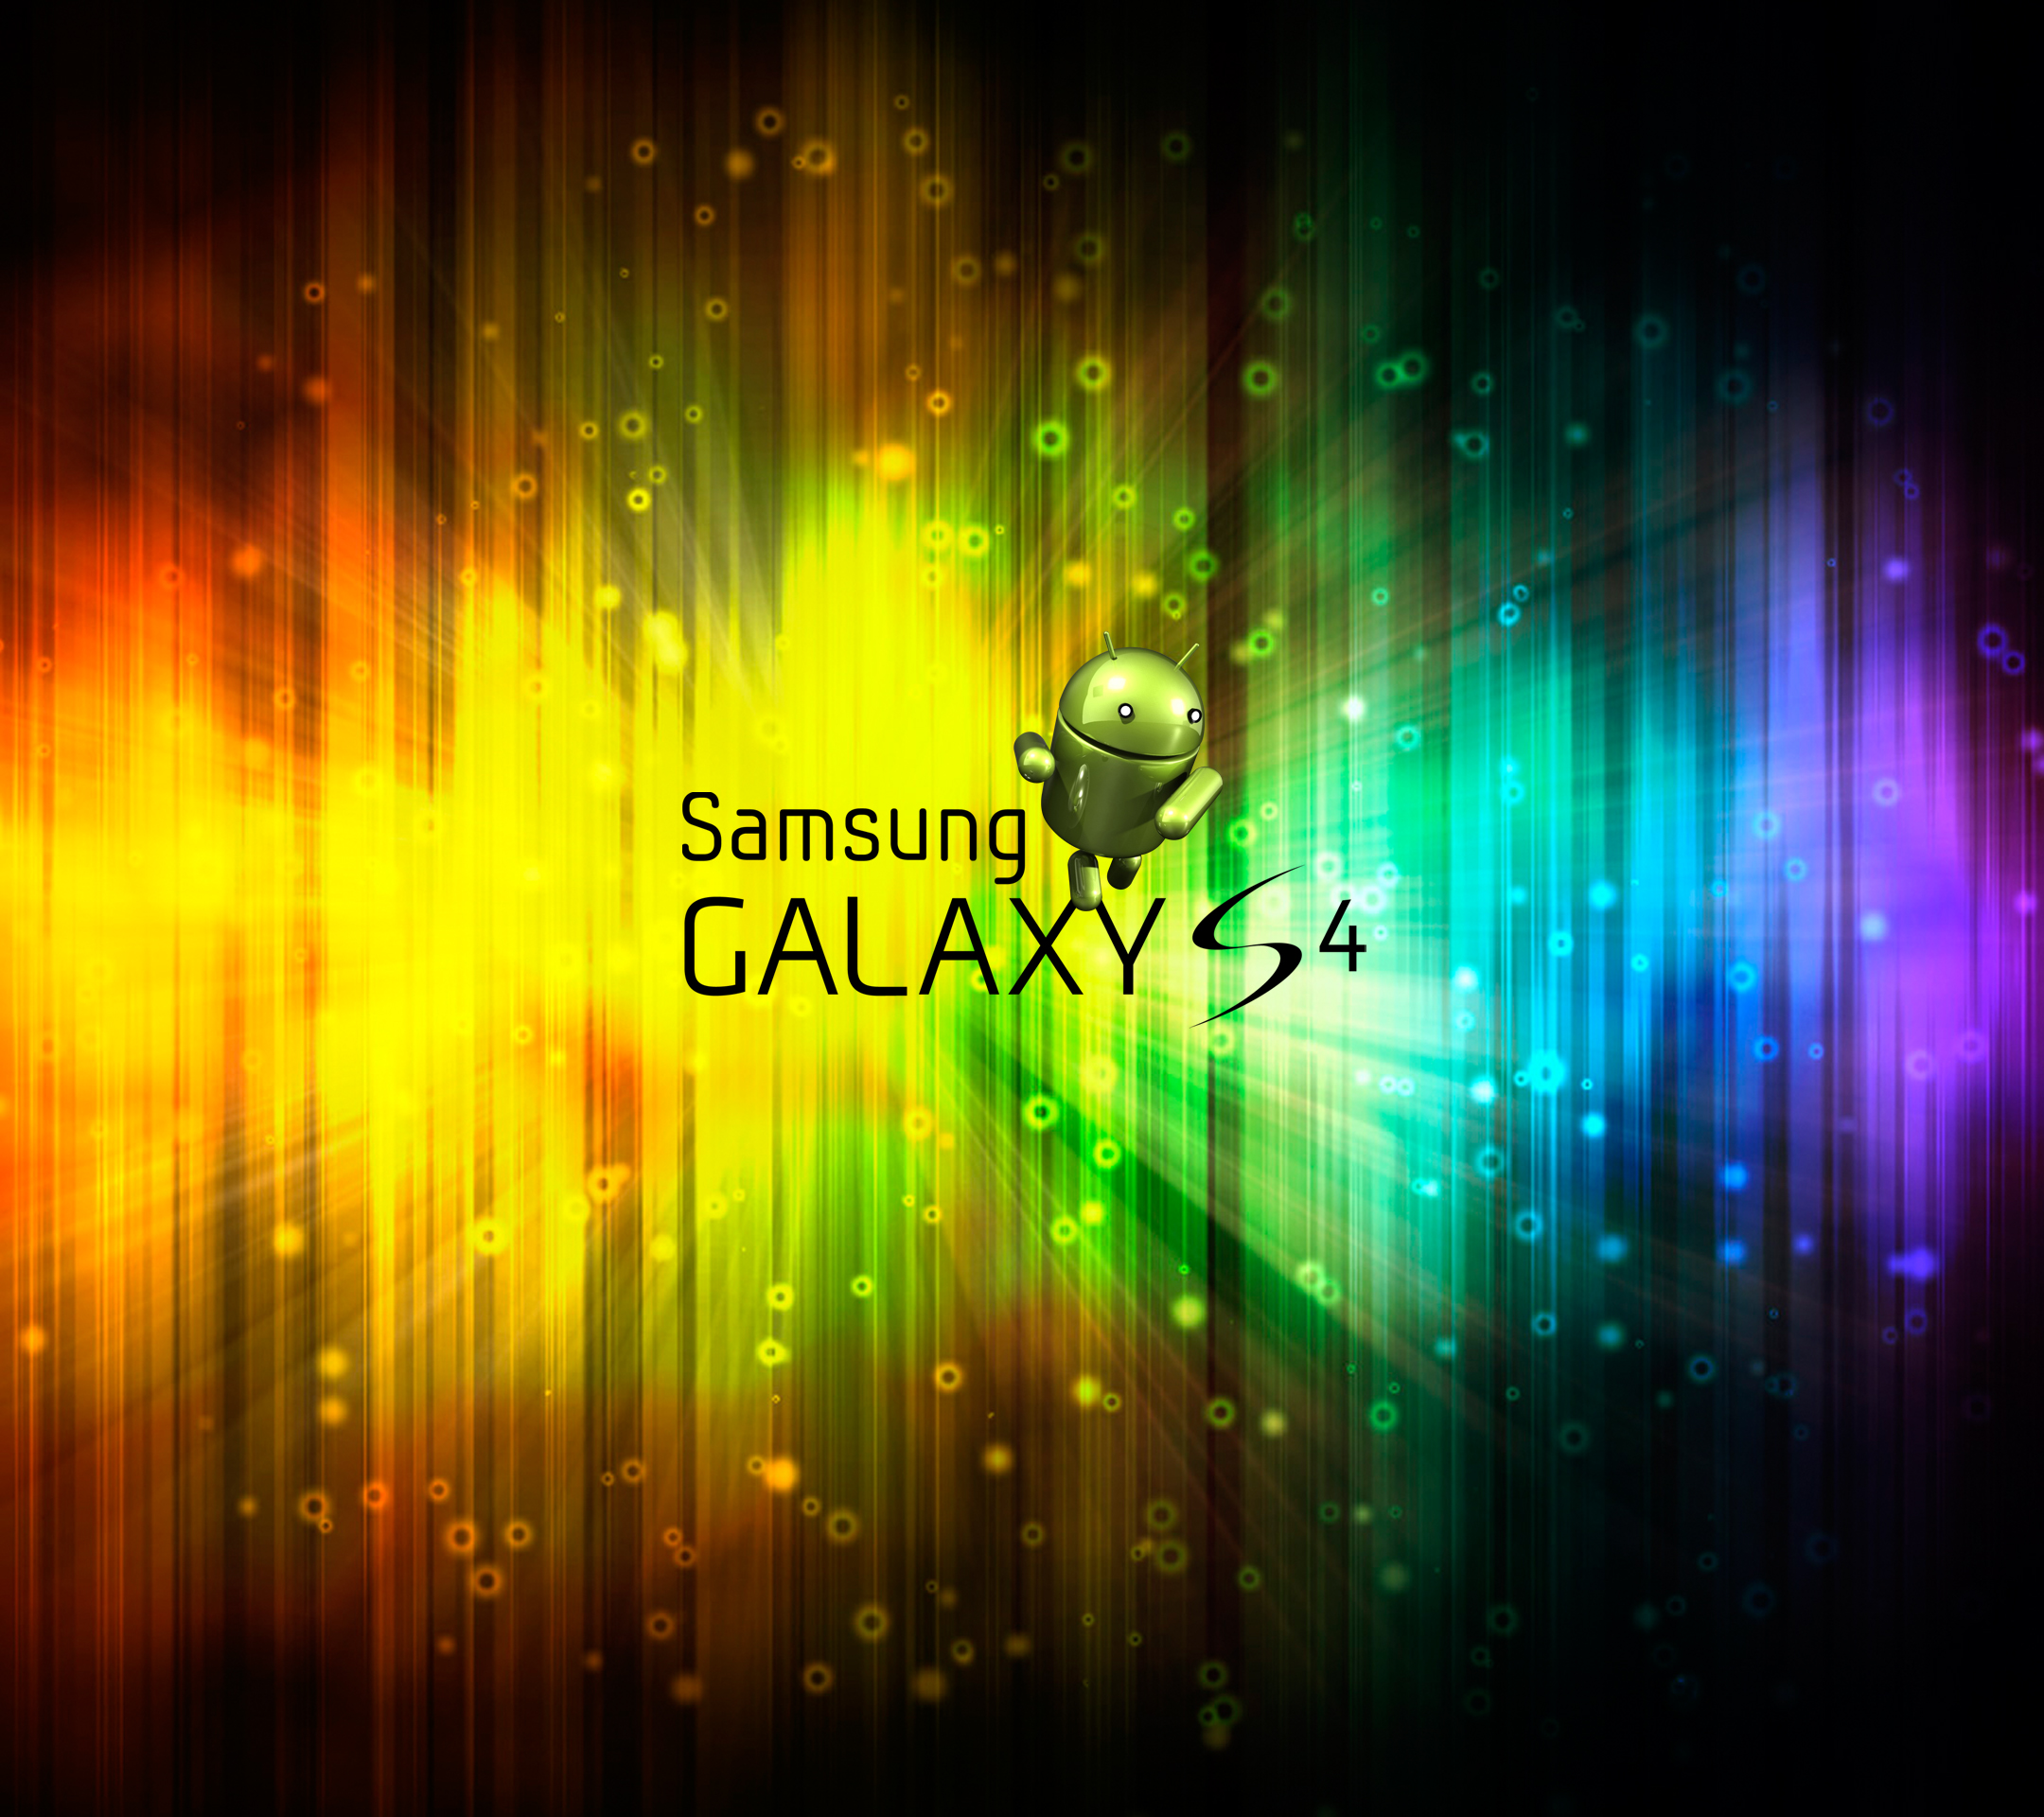 Samsung Galaxy S4 Wallpapers amp Pictures Hd Wallpapers